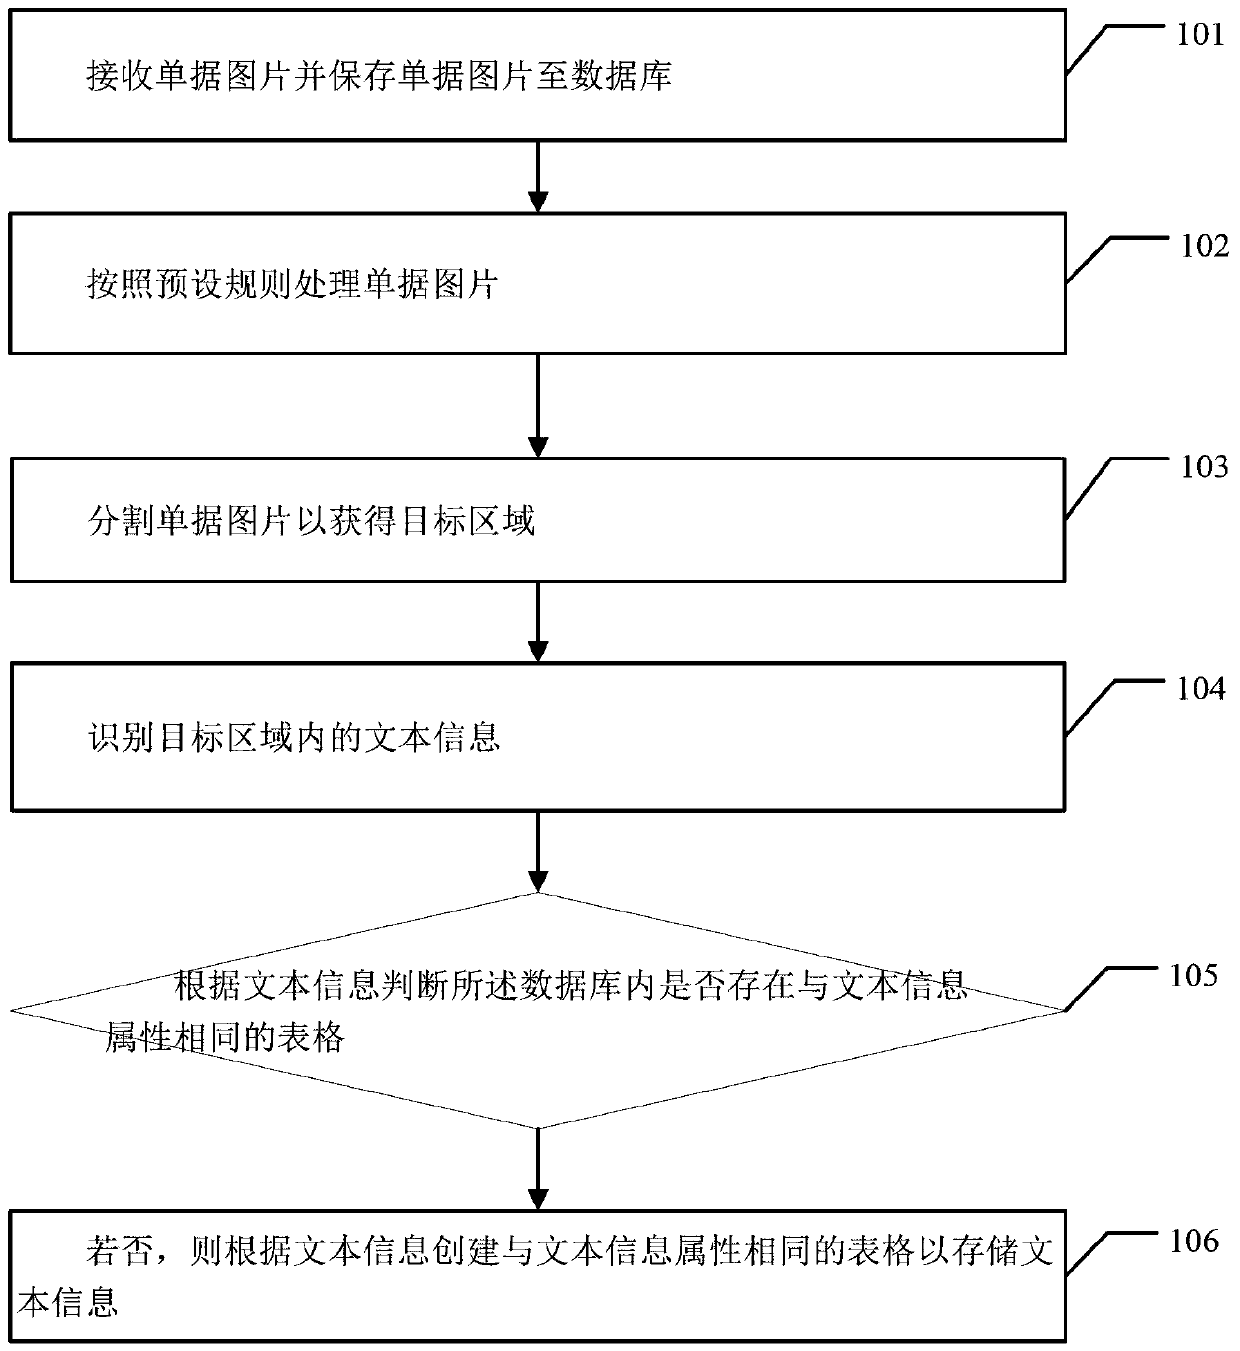 Receipt management method and related device